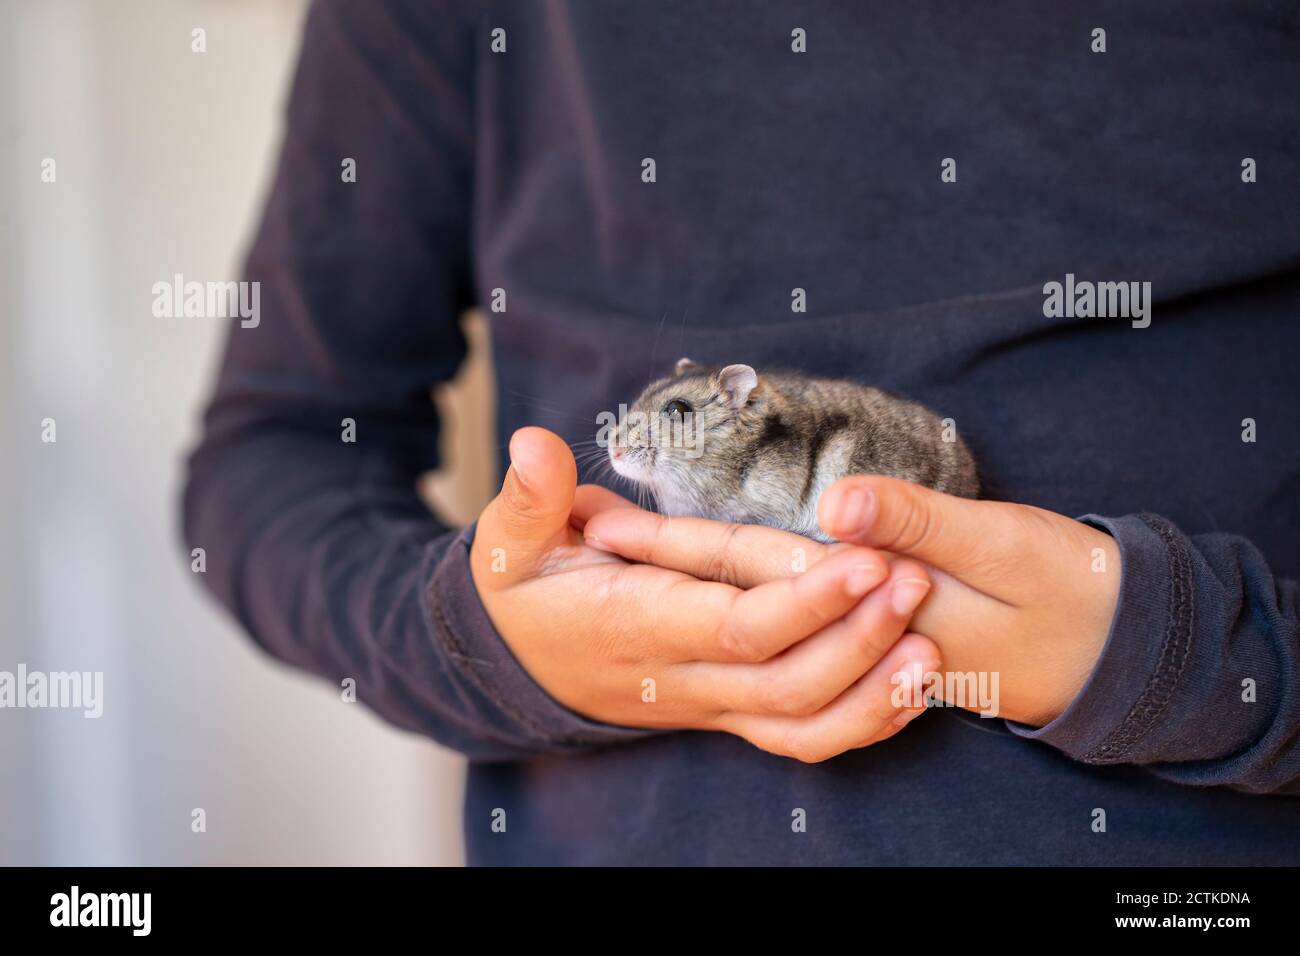 Midsection of girl holding cute hamster Stock Photo